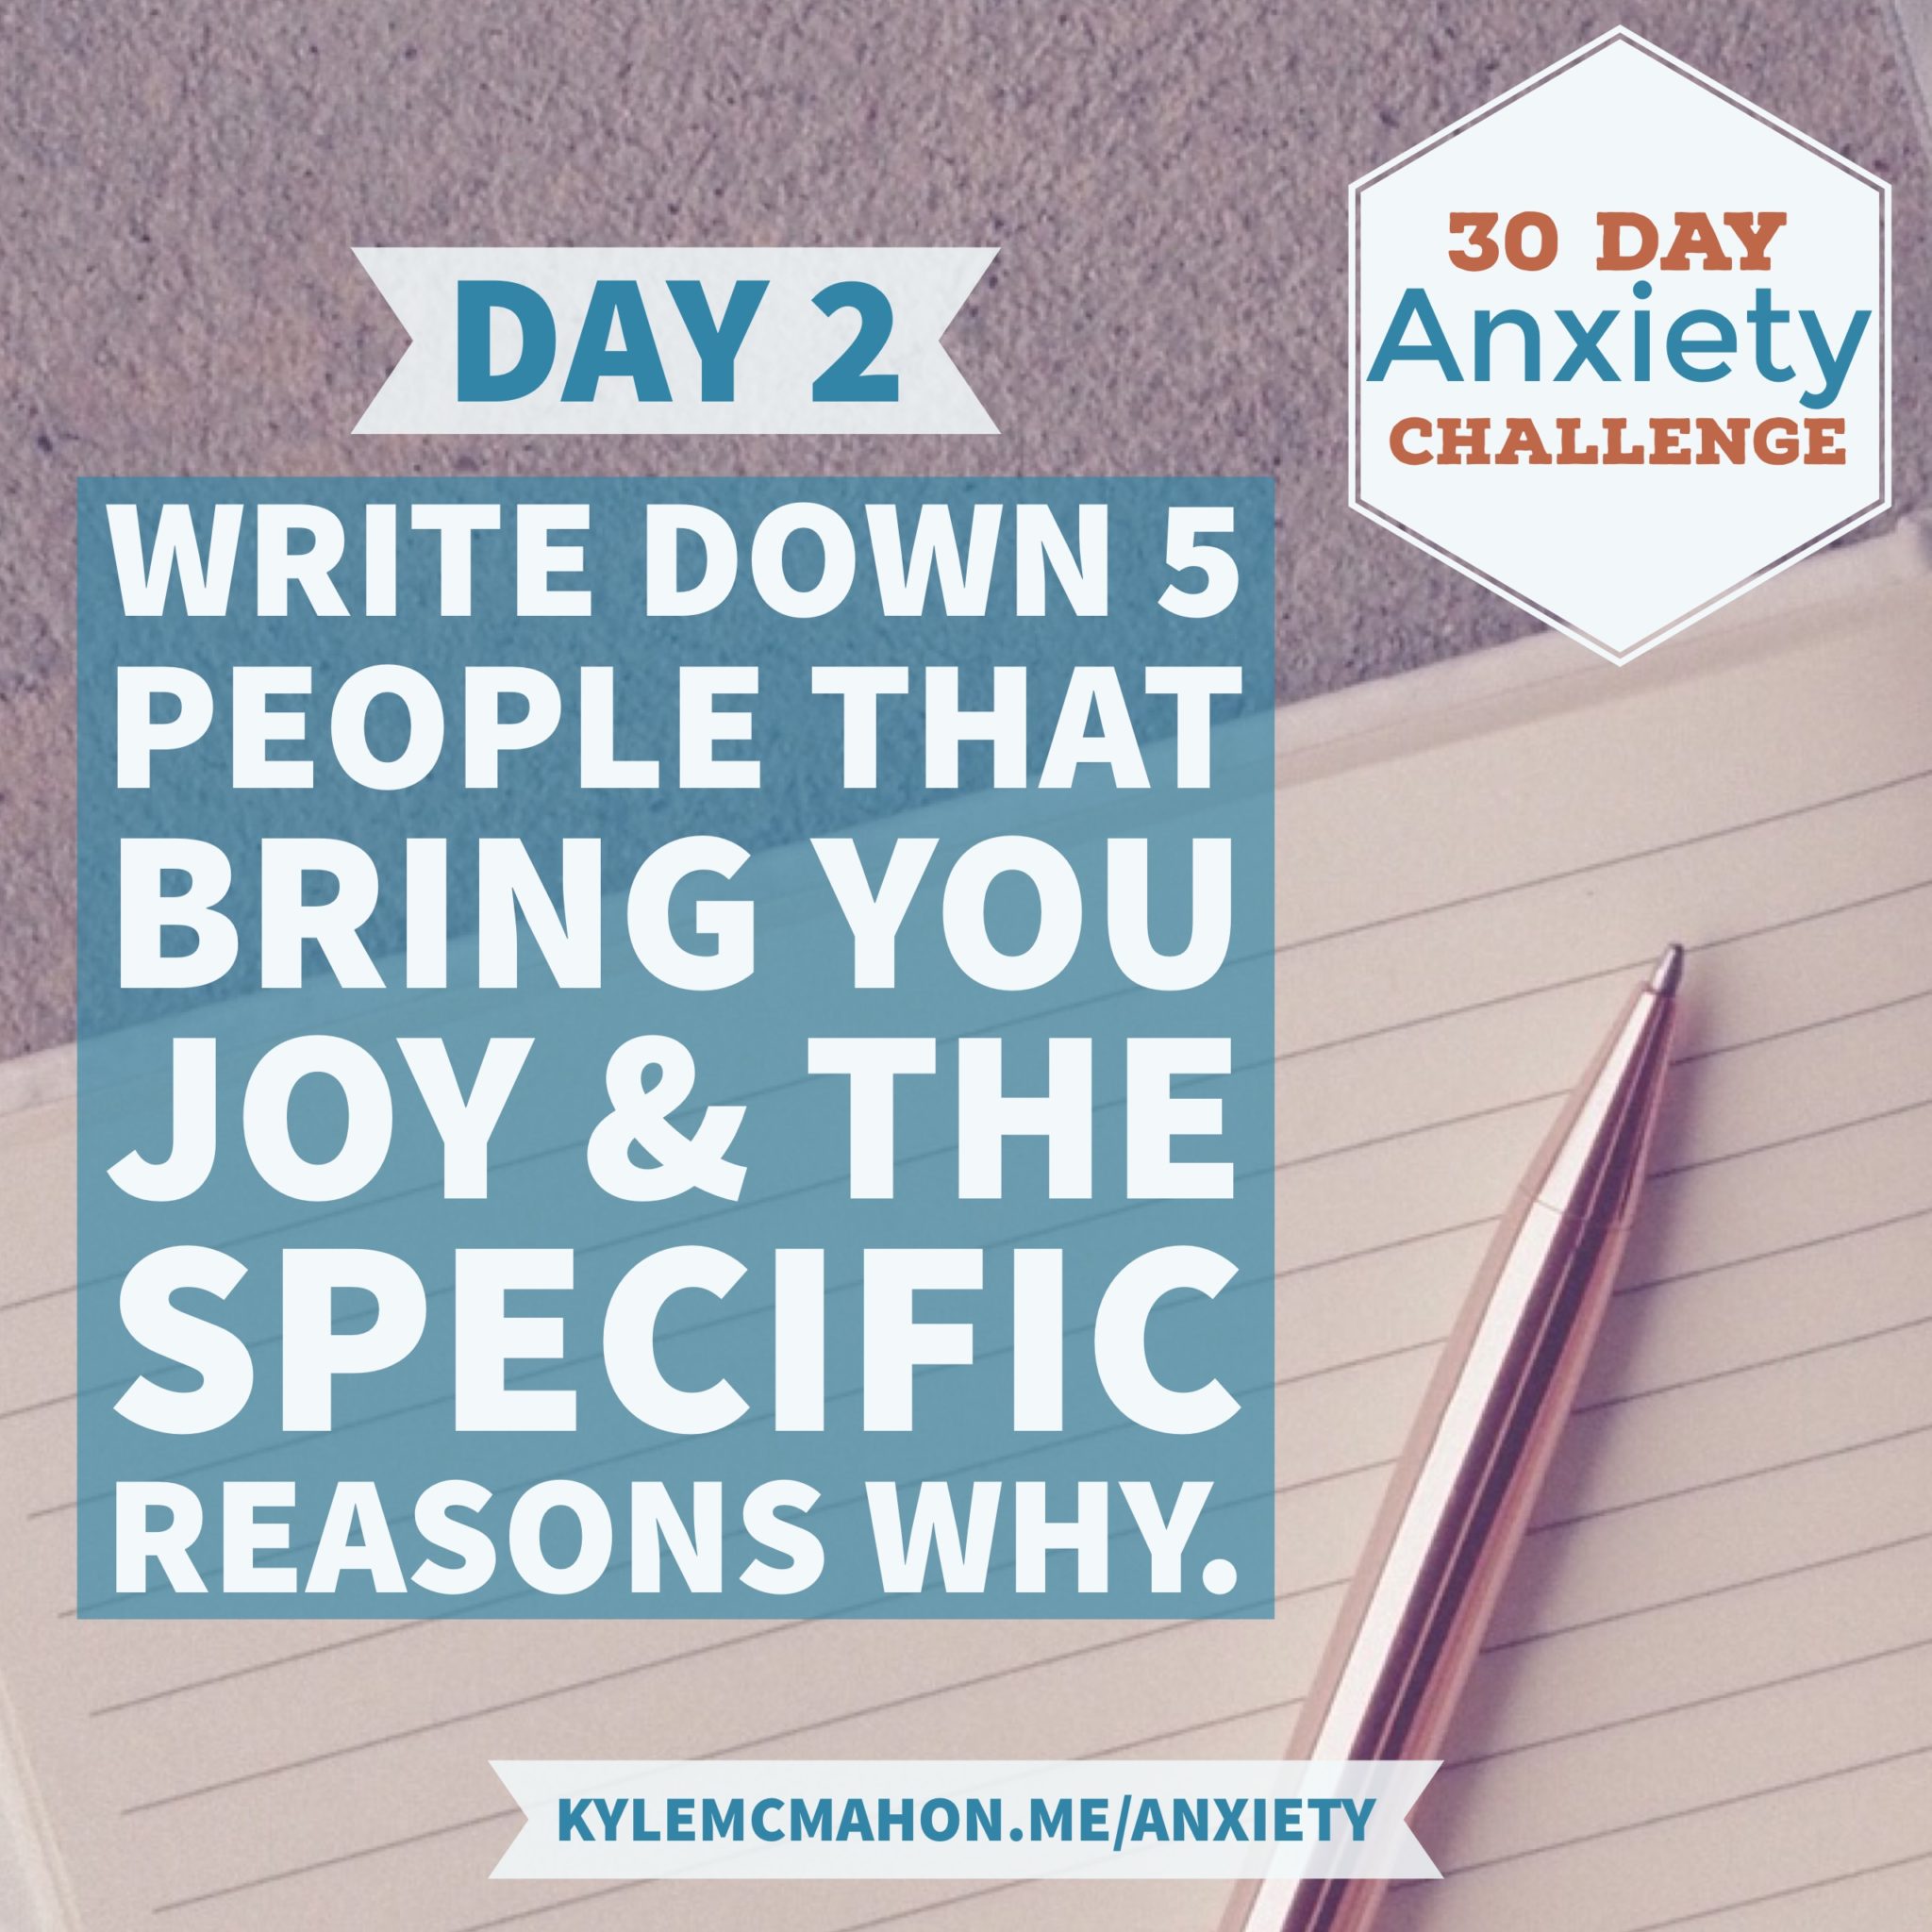 Day 2 of the 30 Day Anxiety Challenge with Kyle McMahon * Write down 5 people that bring you joy